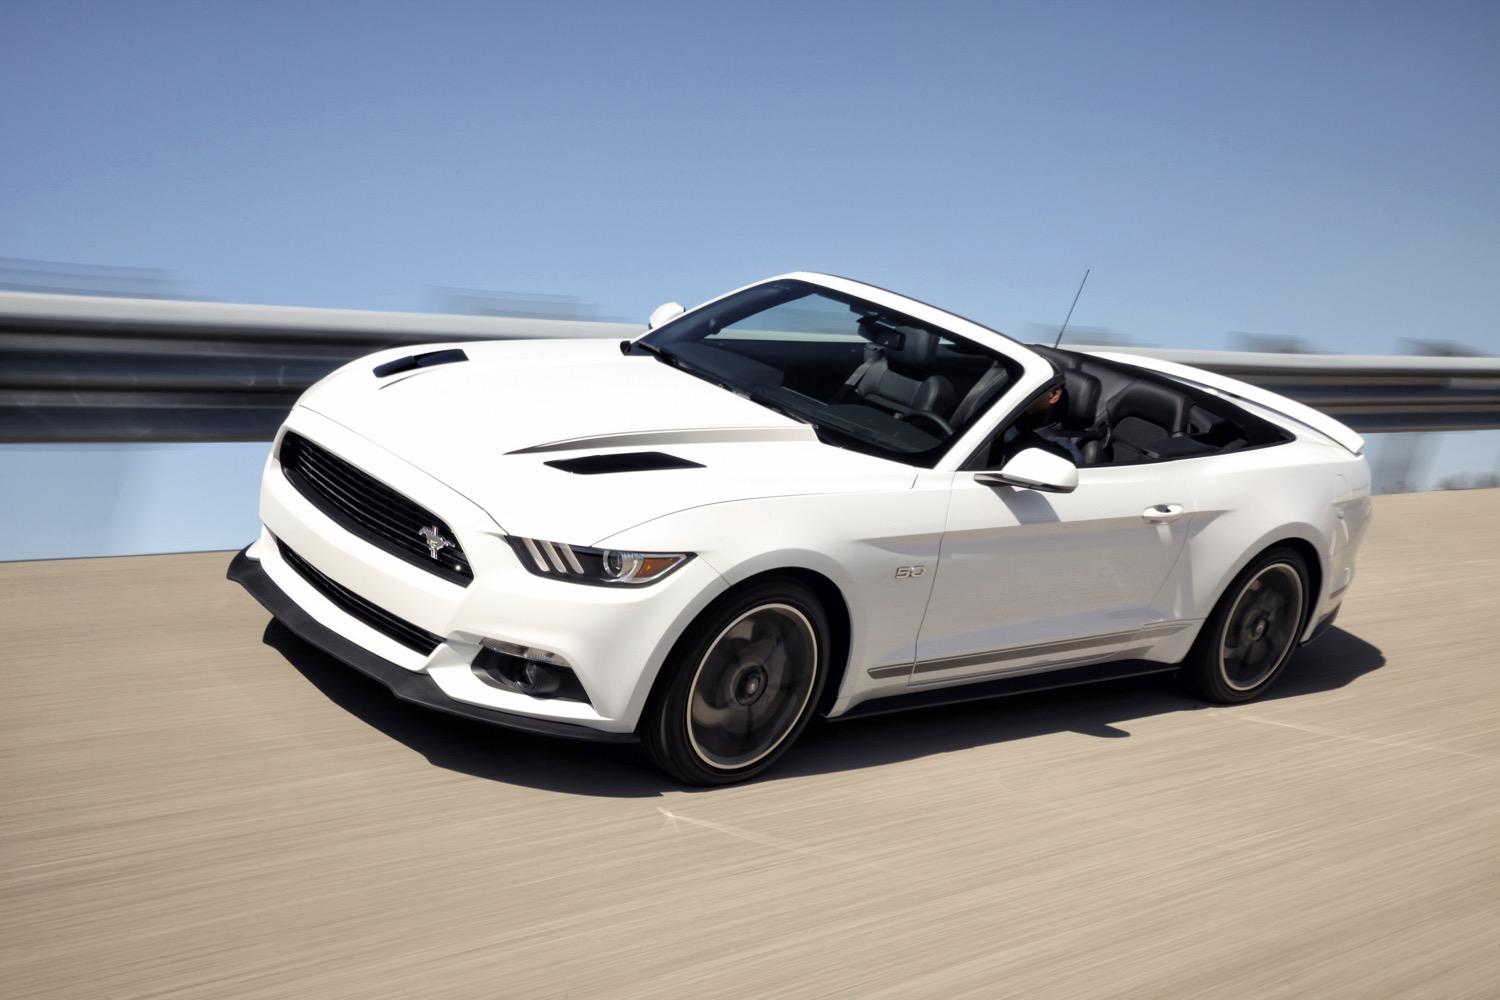 2016 Ford Mustang GT convertible California Special